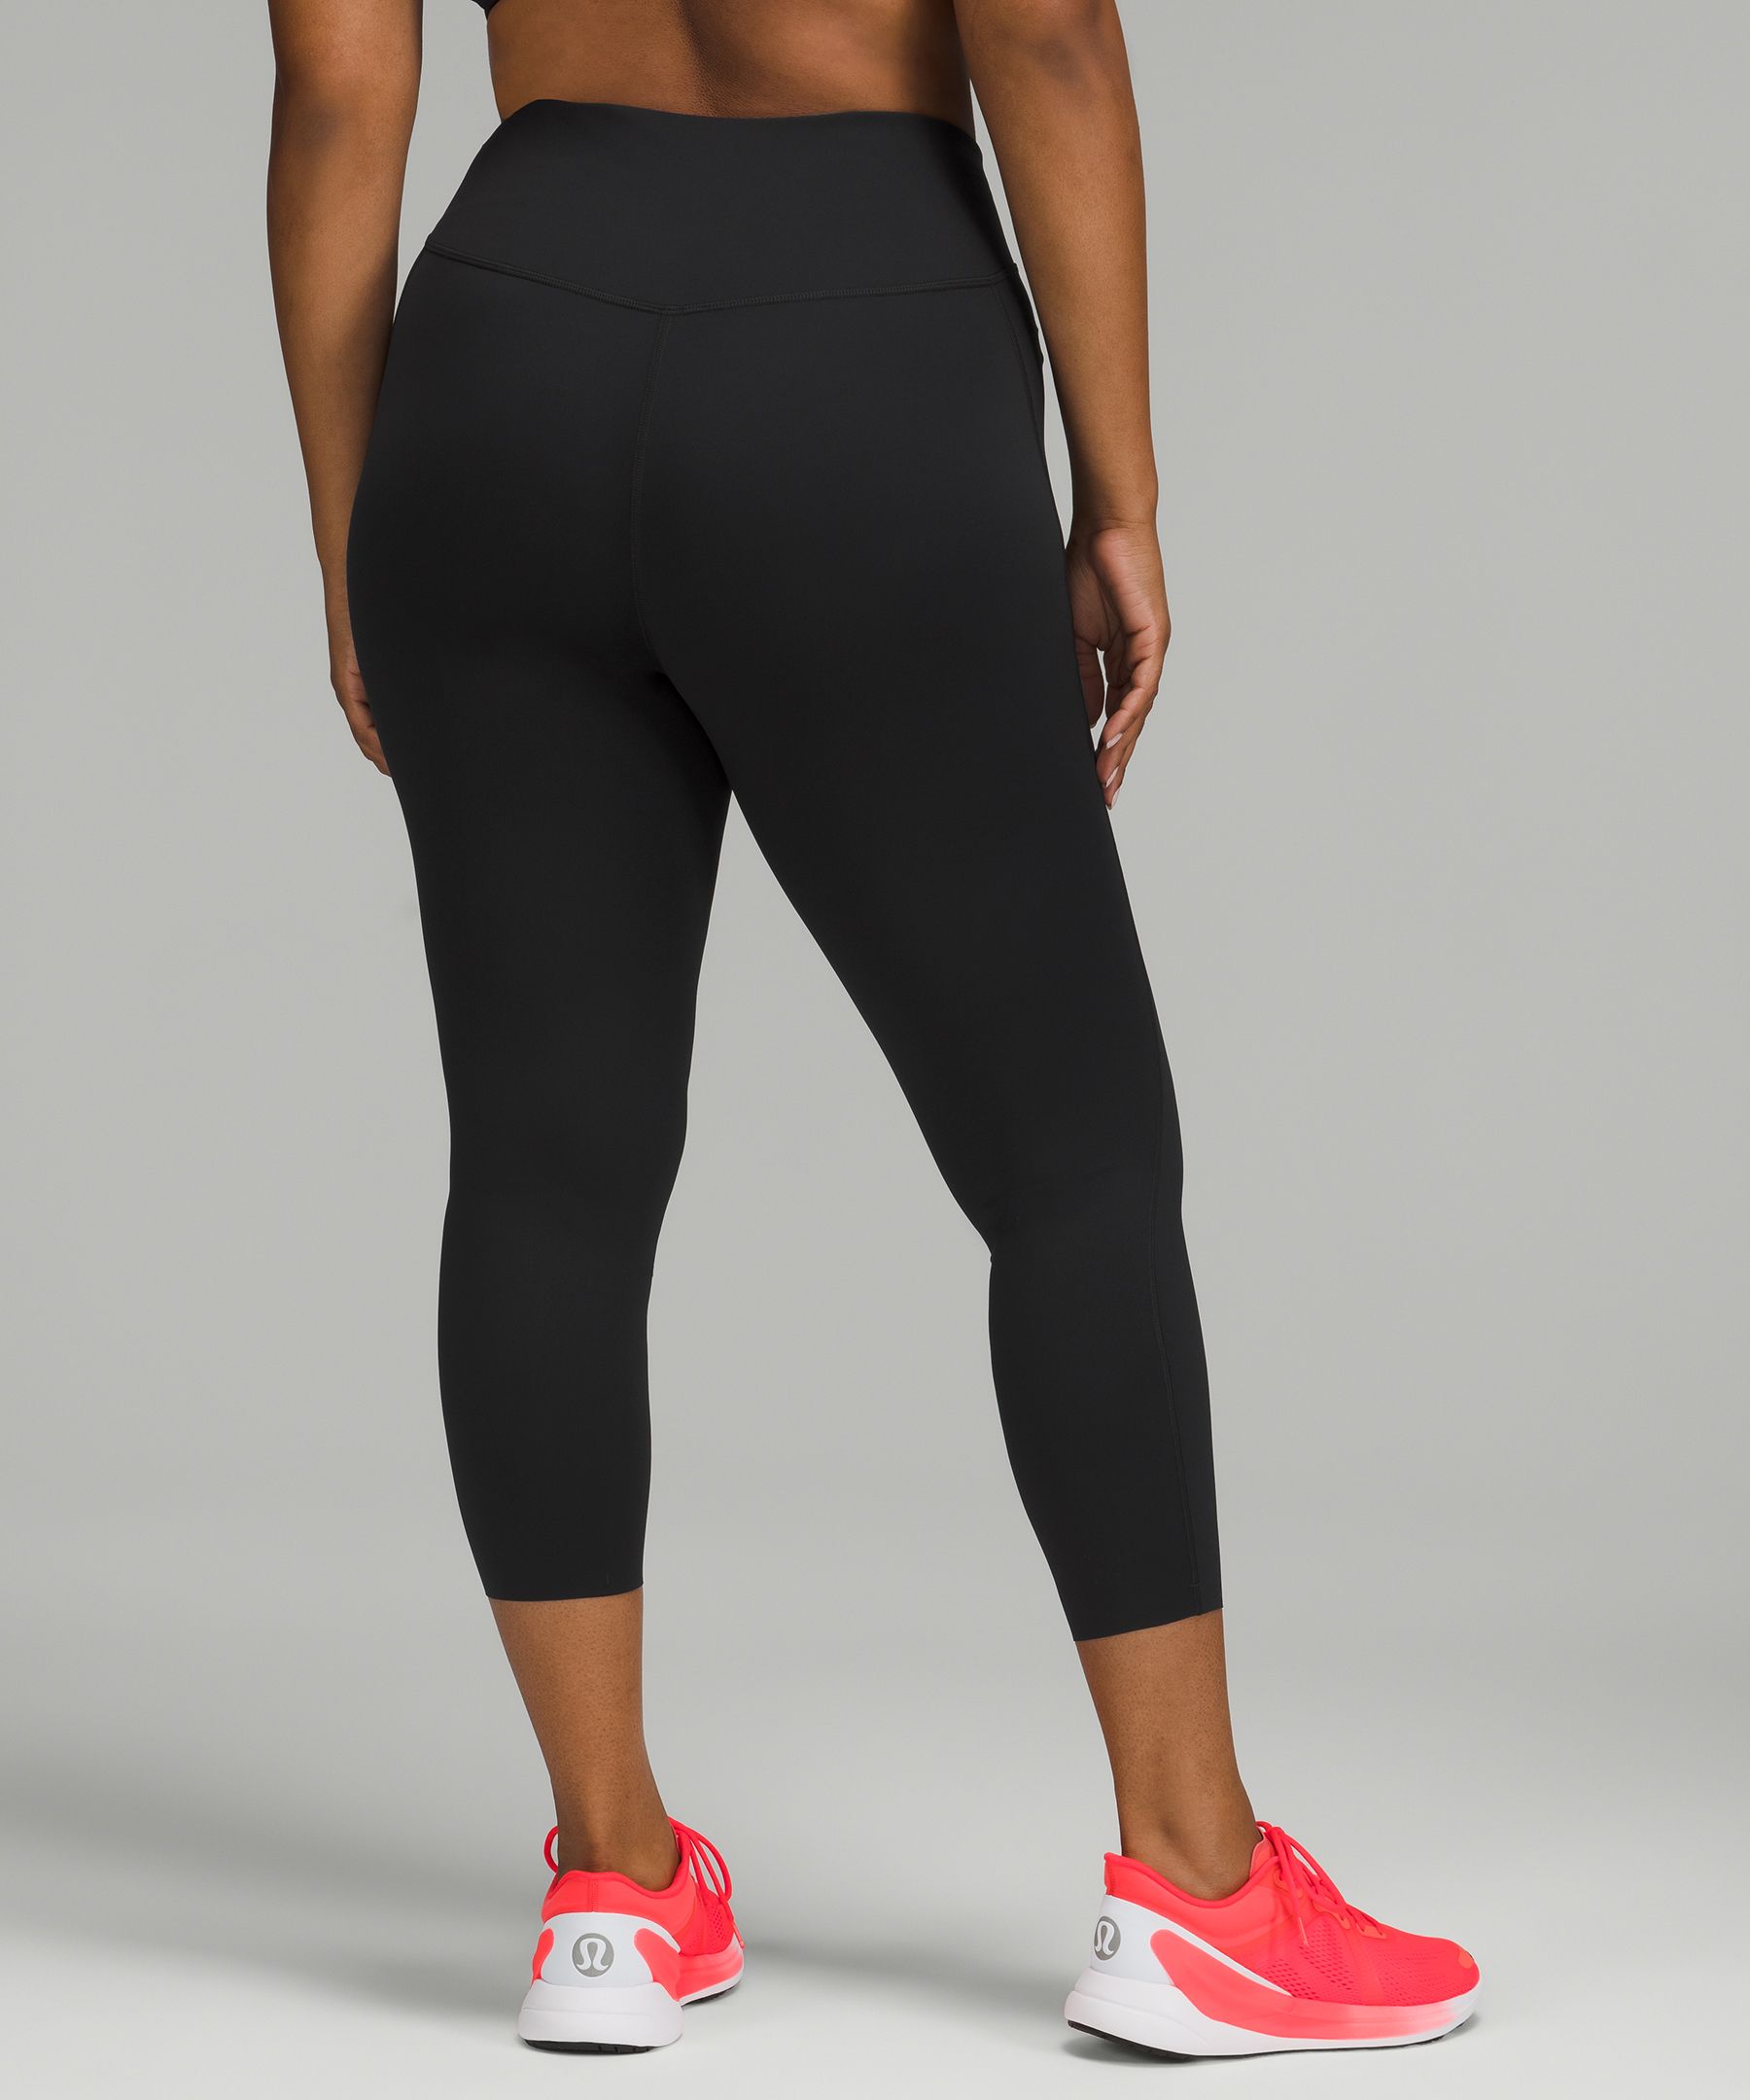 lululemon Base Pace Tights Review - Schimiggy Reviews